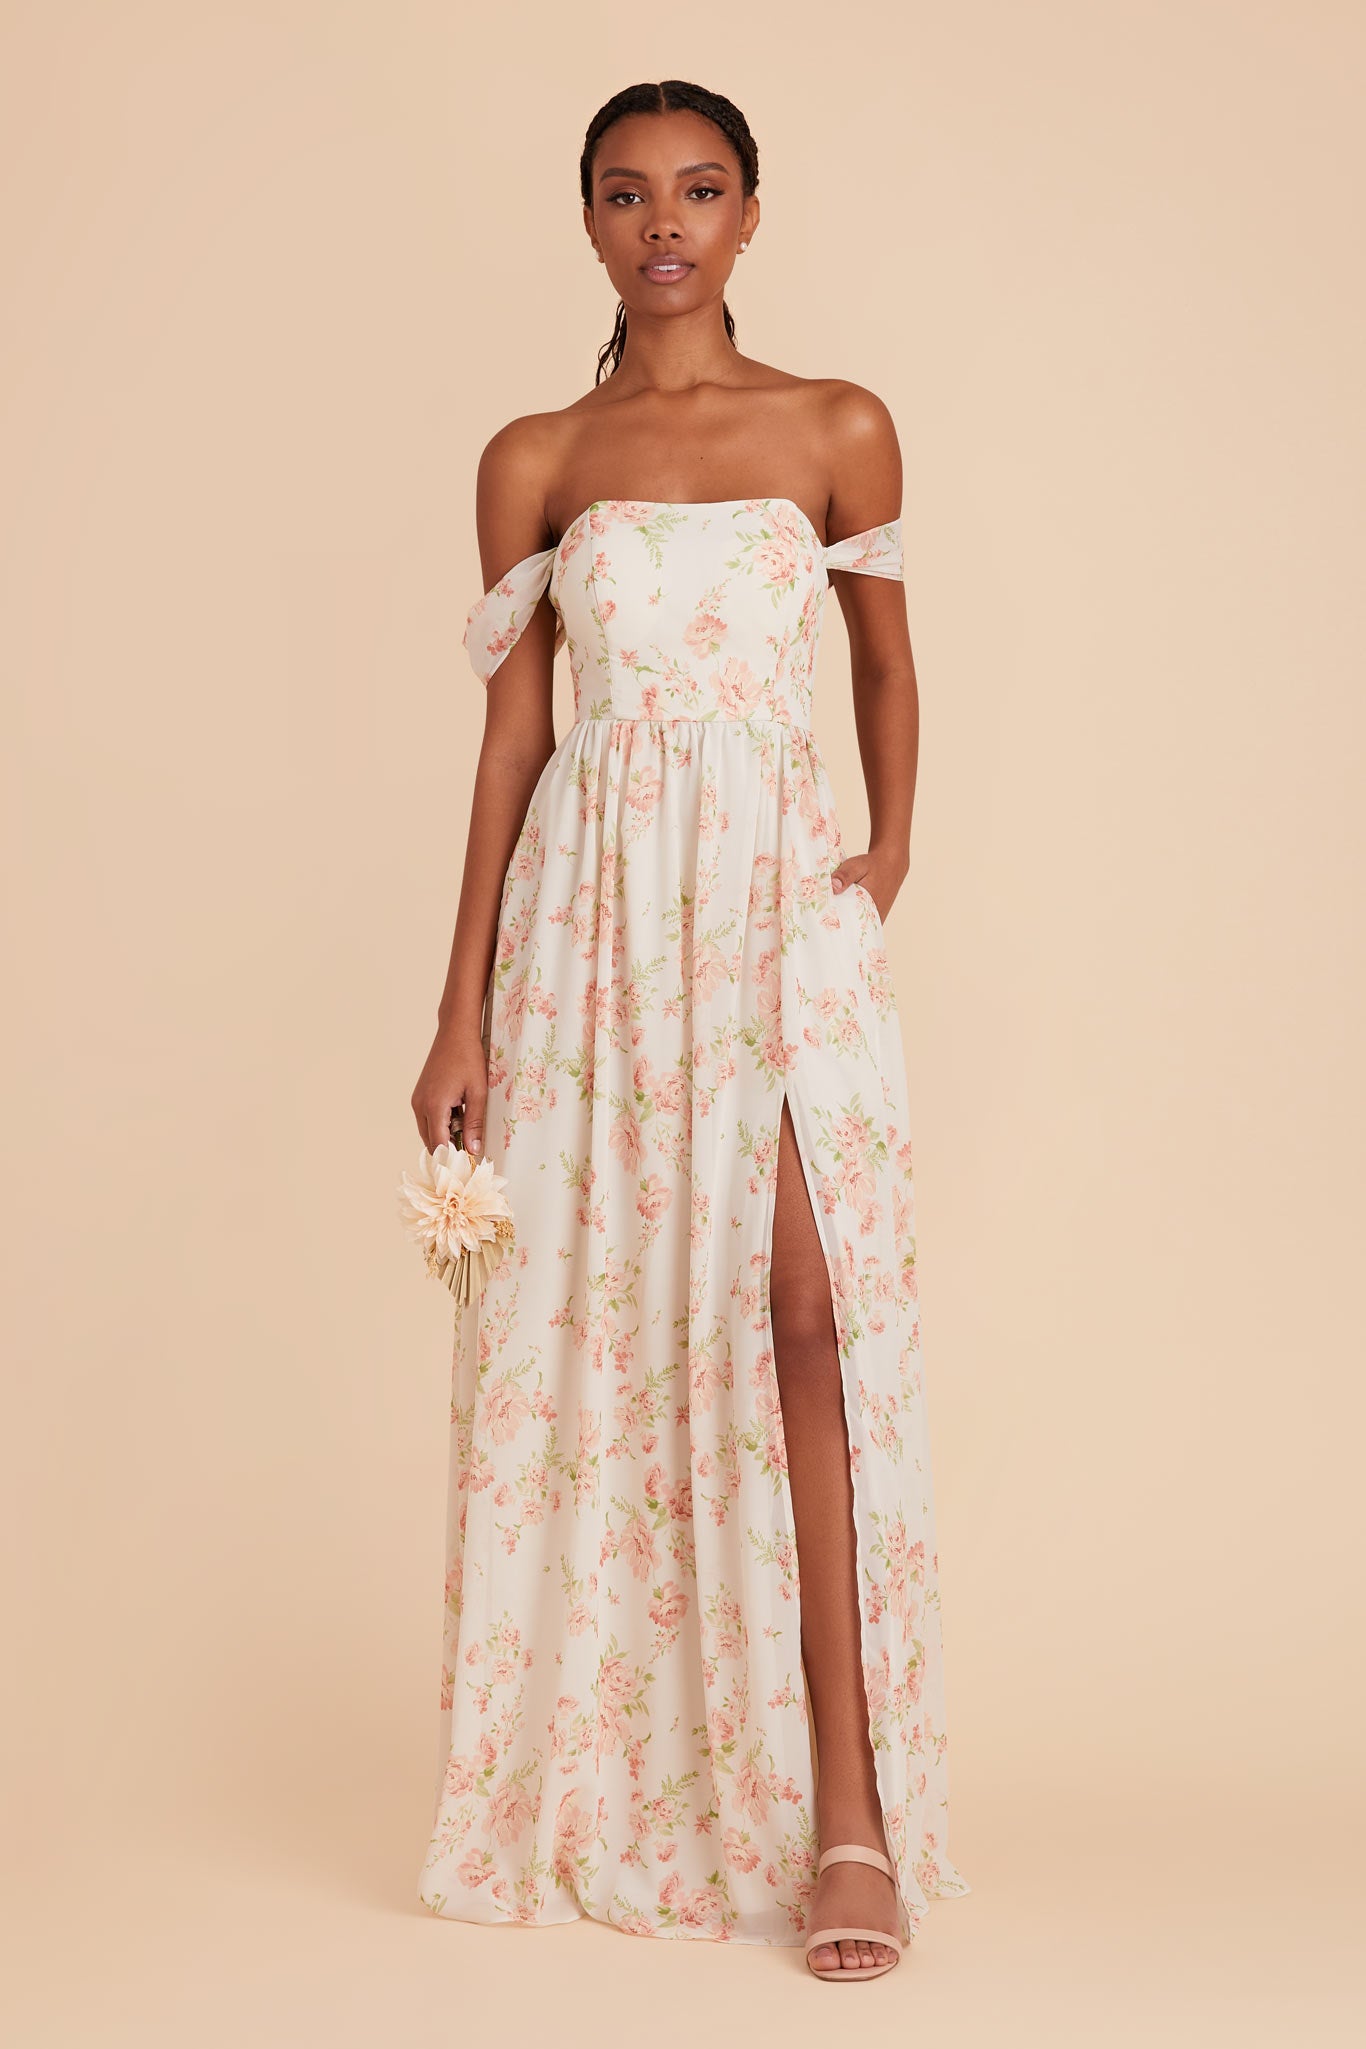 Whimsical Blooms August Convertible Dress by Birdy Grey